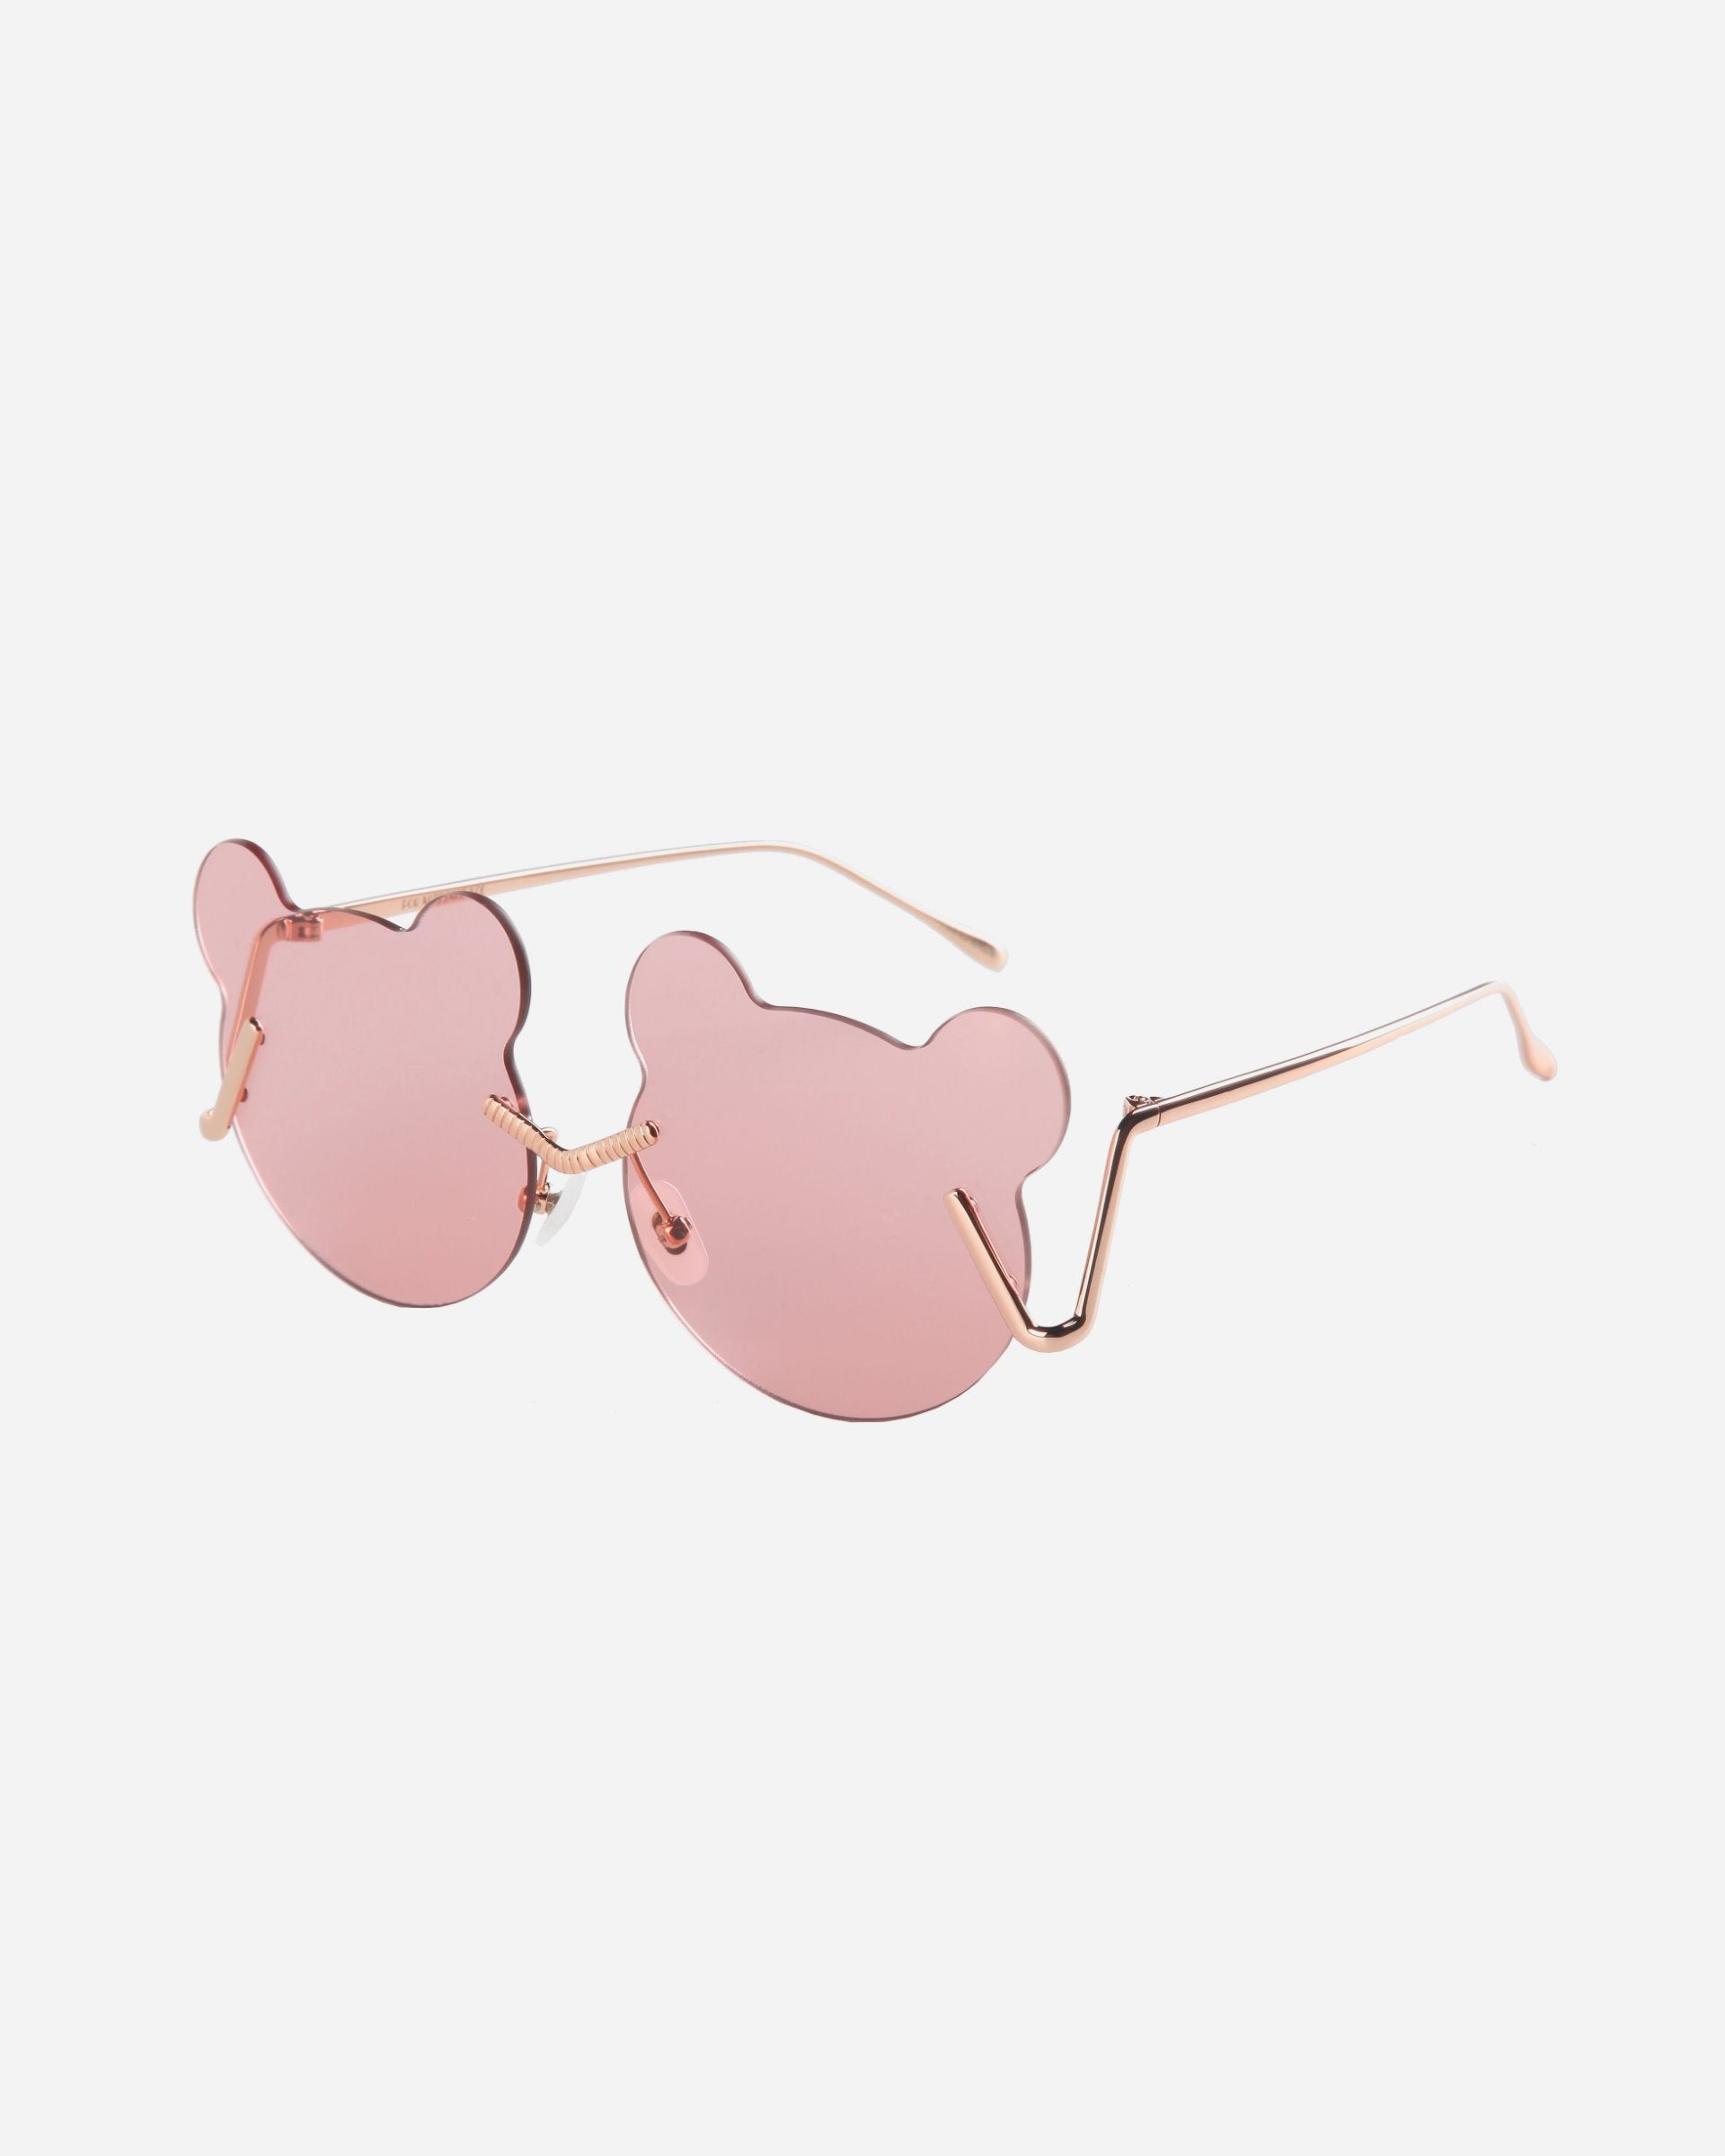 The For Art&#39;s Sake® Teddy sunglasses have pink, bear-shaped lenses and thin gold frames on a white background. The temples of the glasses have a slight angular design where they meet the lenses. Featuring UV protection, these stylish shades also come with adjustable nosepads for added comfort and fit.